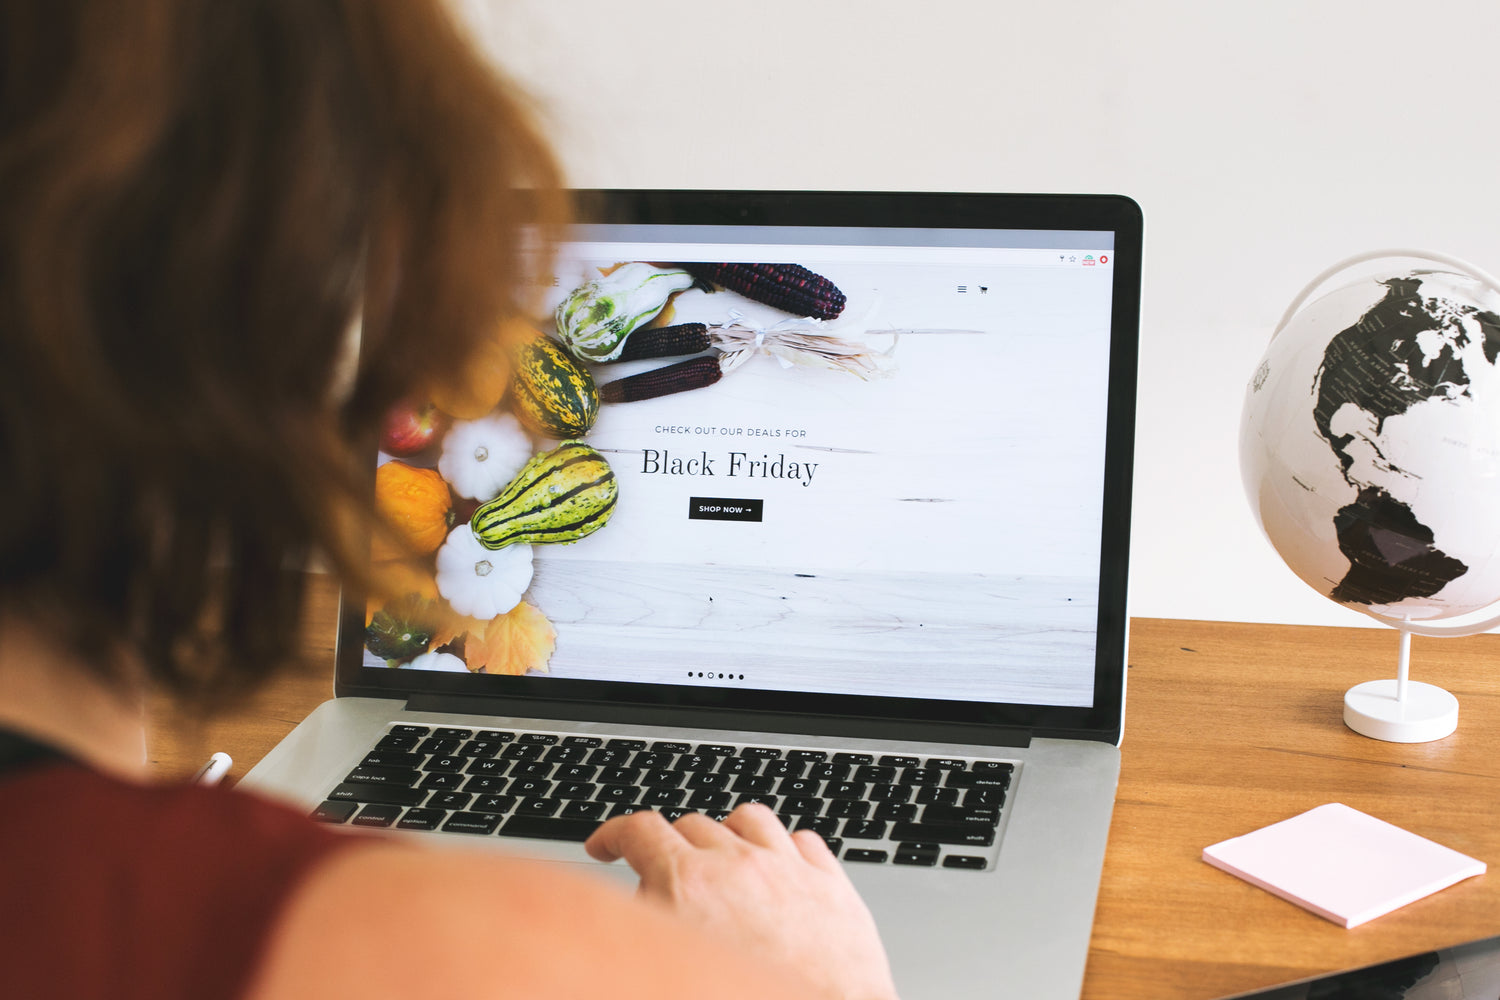  A person with shoulder-length hair, showcasing a hint of tattoo ink on their wrist, uses a laptop displaying a Black Friday sale advertisement. The ad features various colorful vegetables. A small globe and a sticky note are placed on the wooden table next to the laptop.